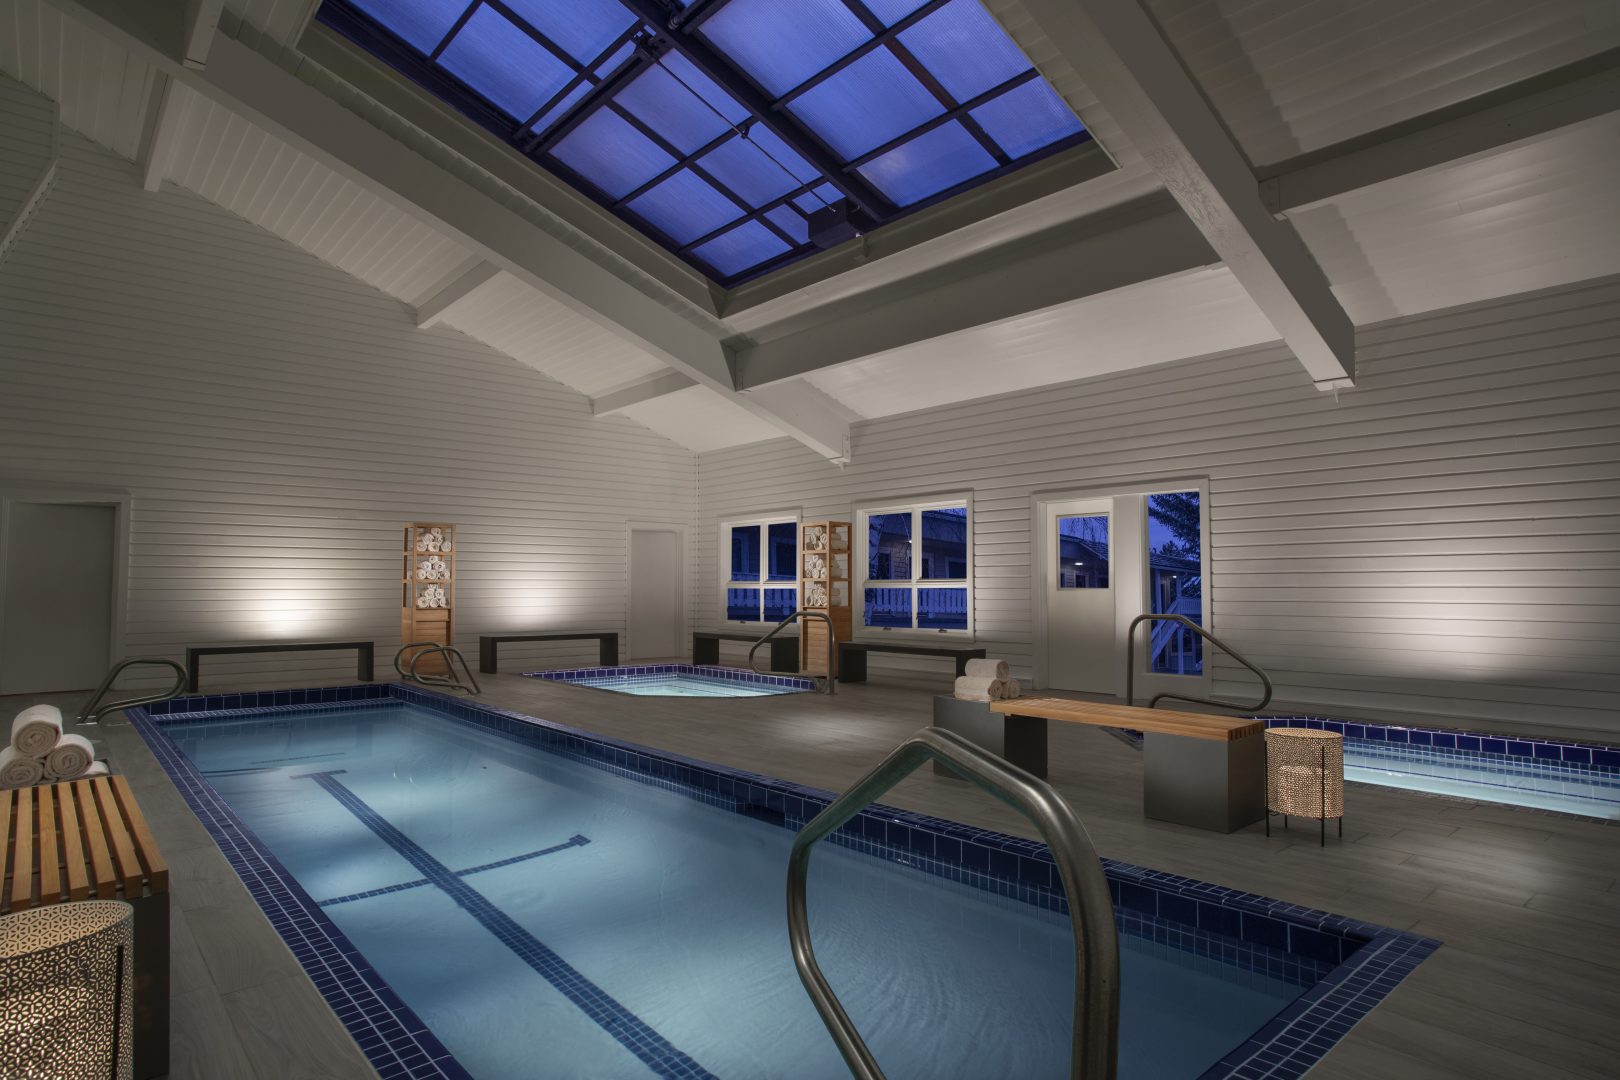 luxurious indoor pool and hot tub facilities with a skylight